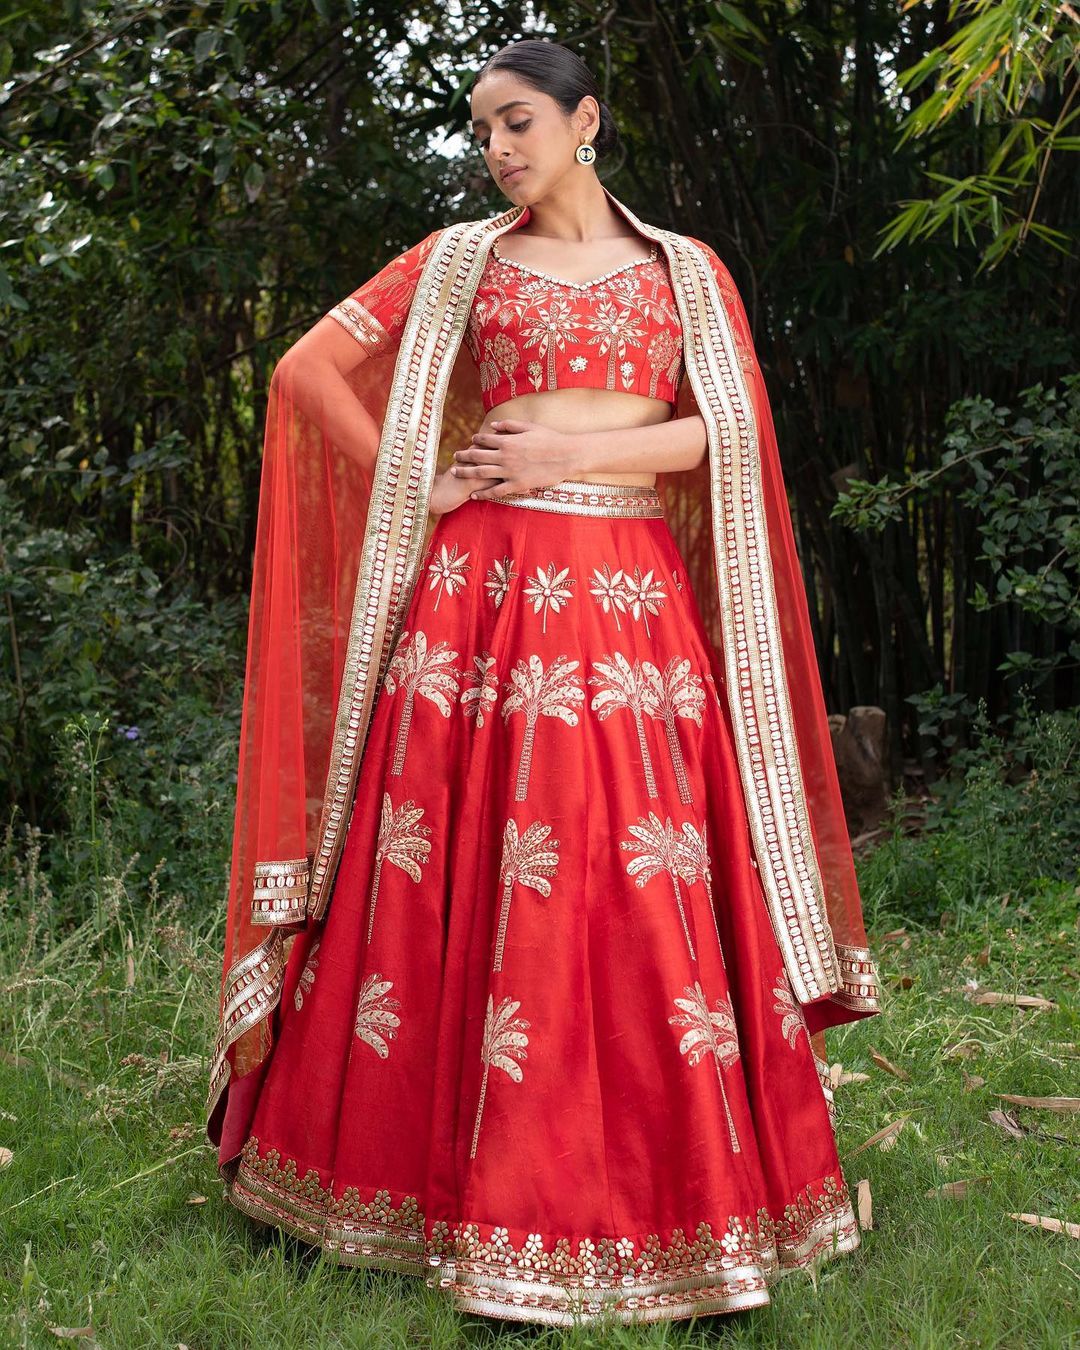 Details more than 82 cream and red combination lehenga - POPPY